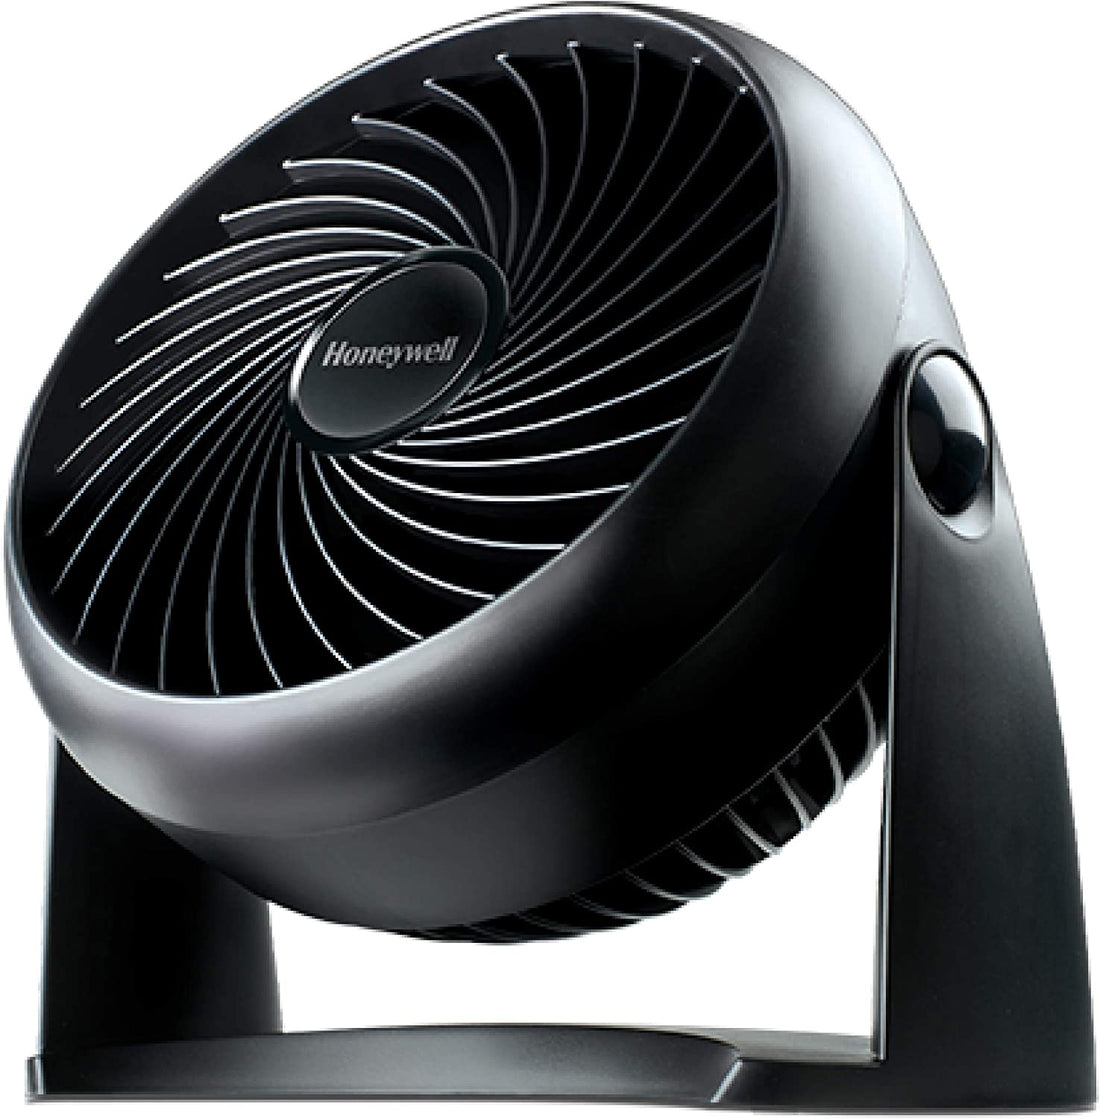 The Ultimate Review of Honeywell HT-900 TurboForce Air Circulator Fan: A Perfect Blend of Performance and Efficiency